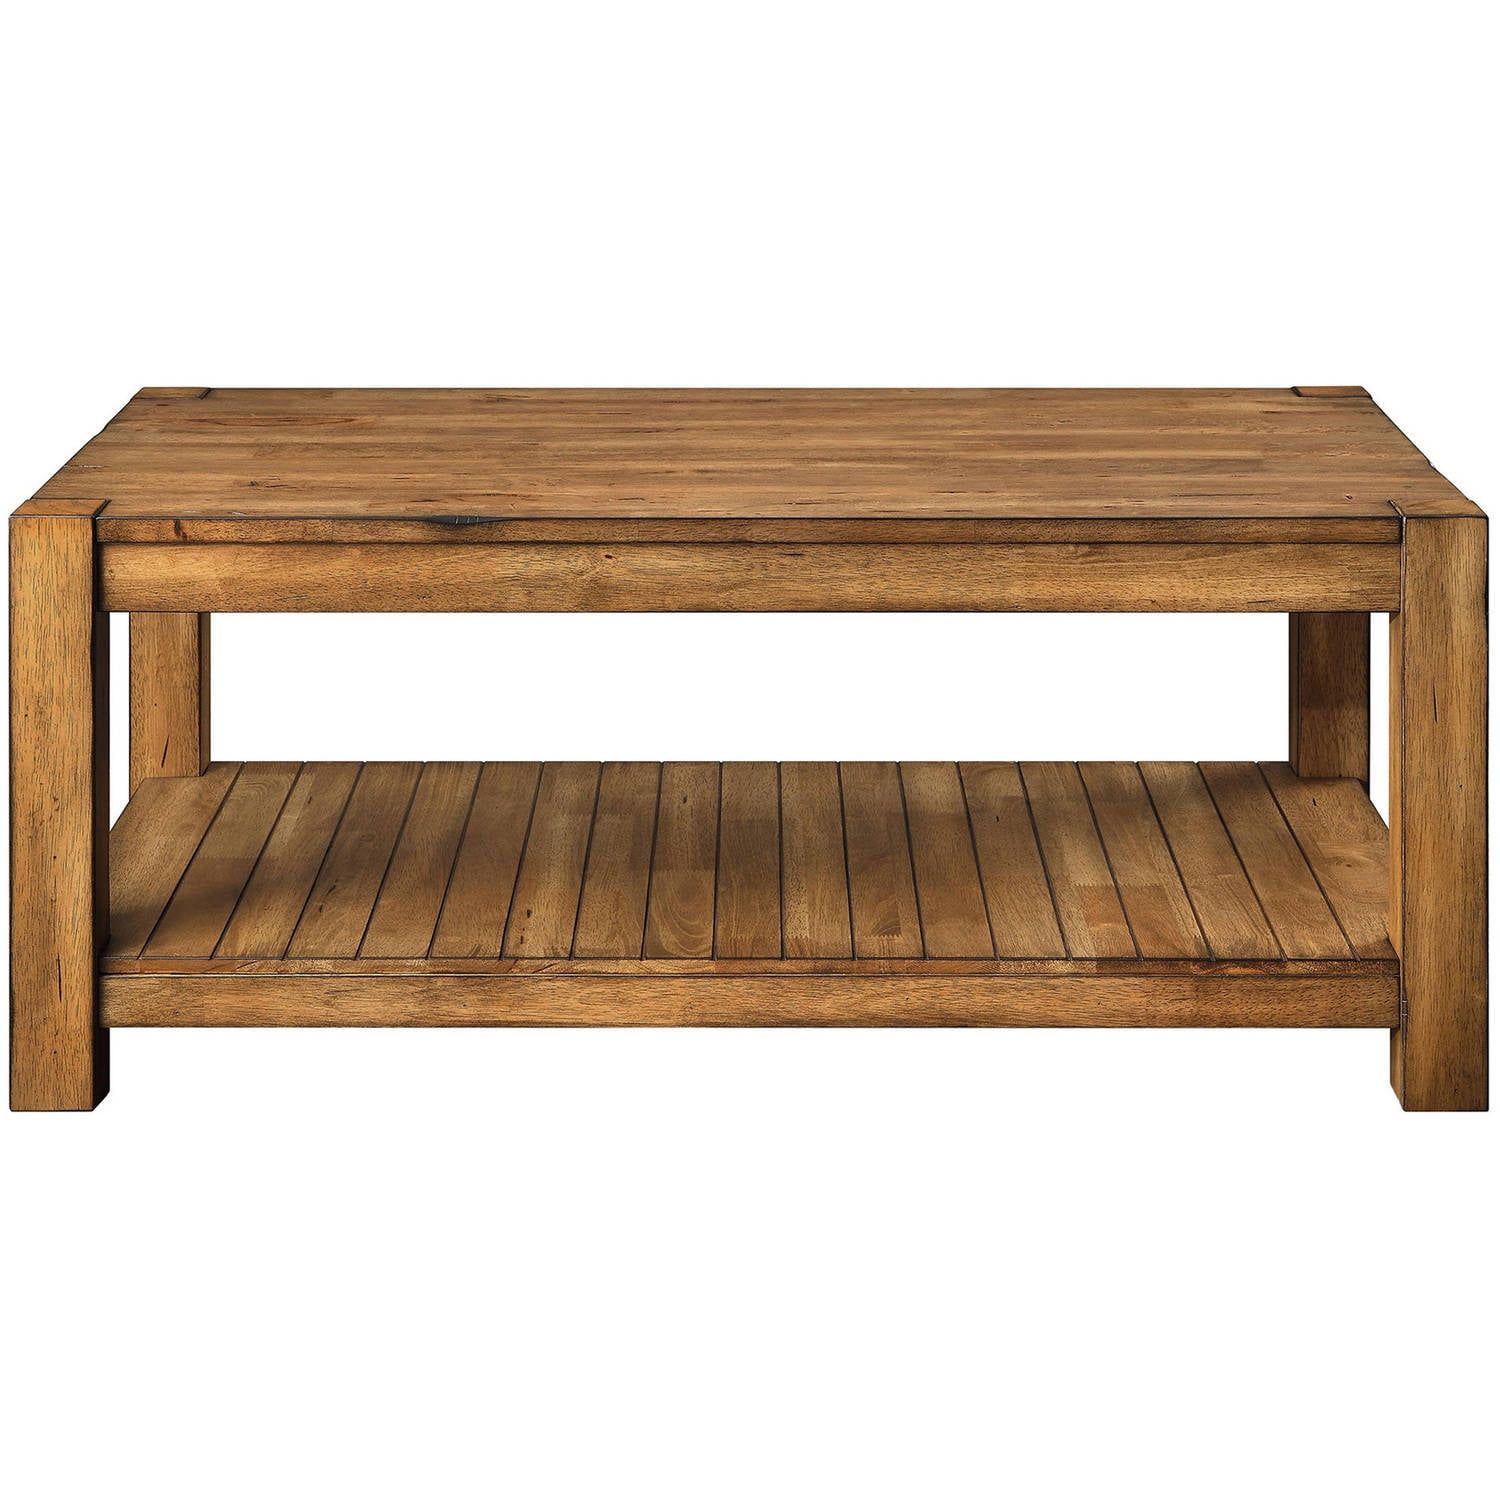 Buy Better Homes & Gardens Bryant Solid Wood Coffee Table, Rustic Maple Within Brown Rustic Coffee Tables (View 10 of 20)